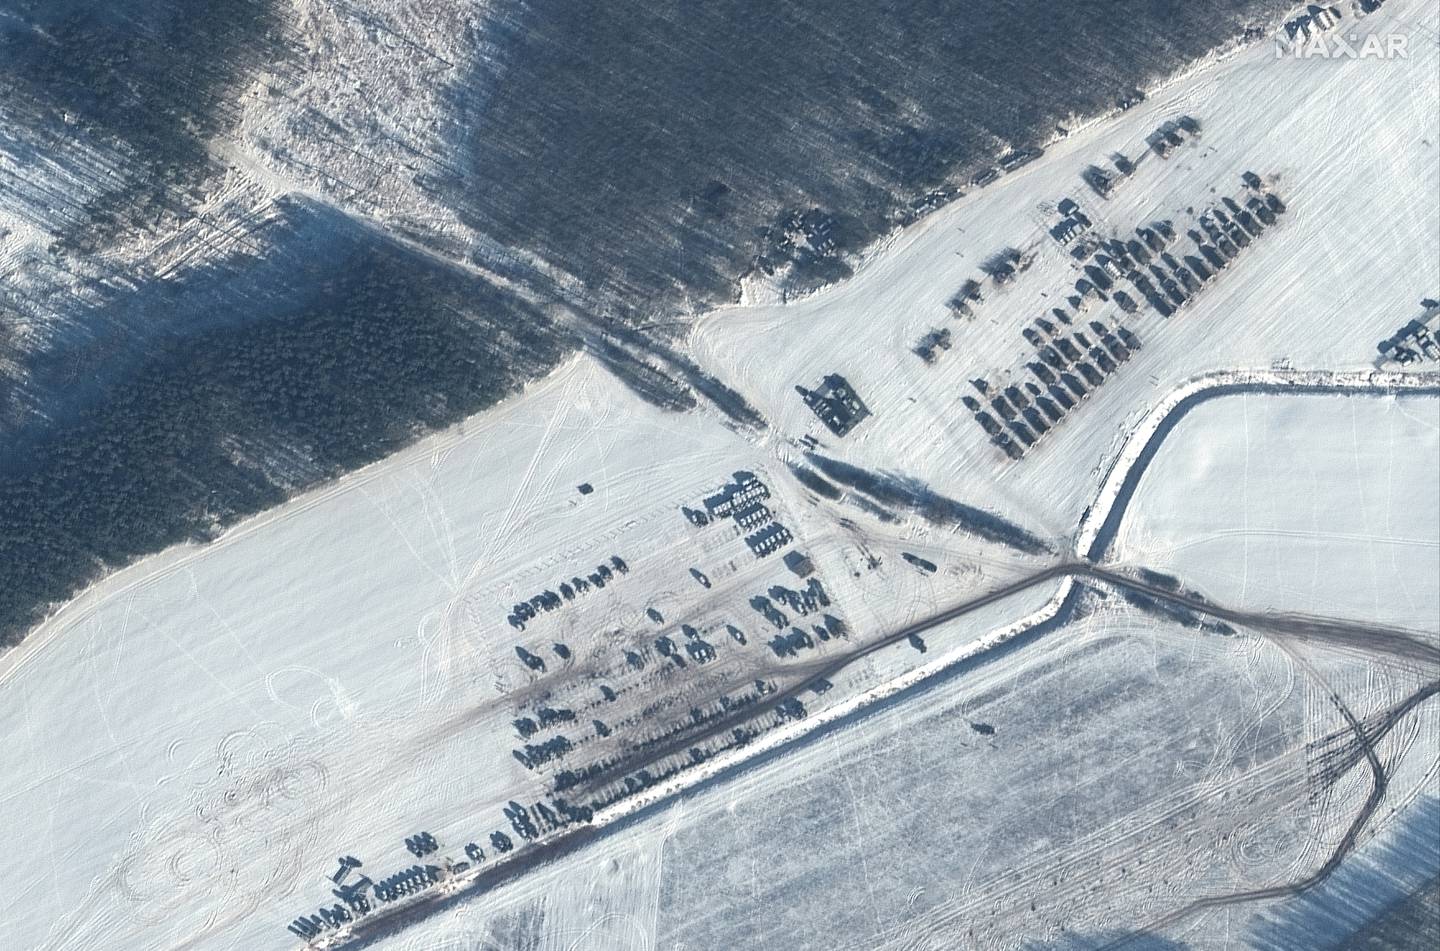 A satellite image from Maxar Technologies shows troops and equipment in Rechitsa, Belarus, north of the border with Ukraine. AP